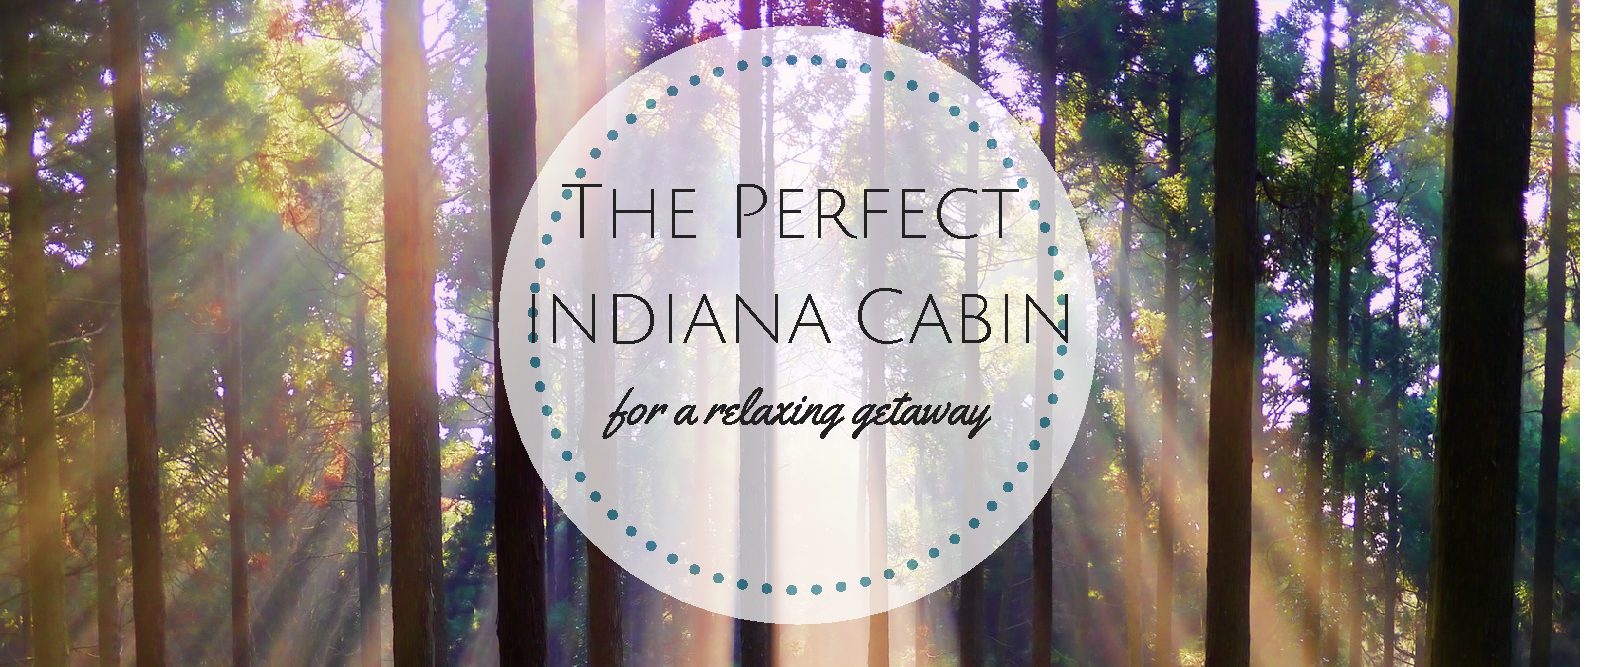 The Most Perfect Indiana Cabin for a Relaxing Getaway